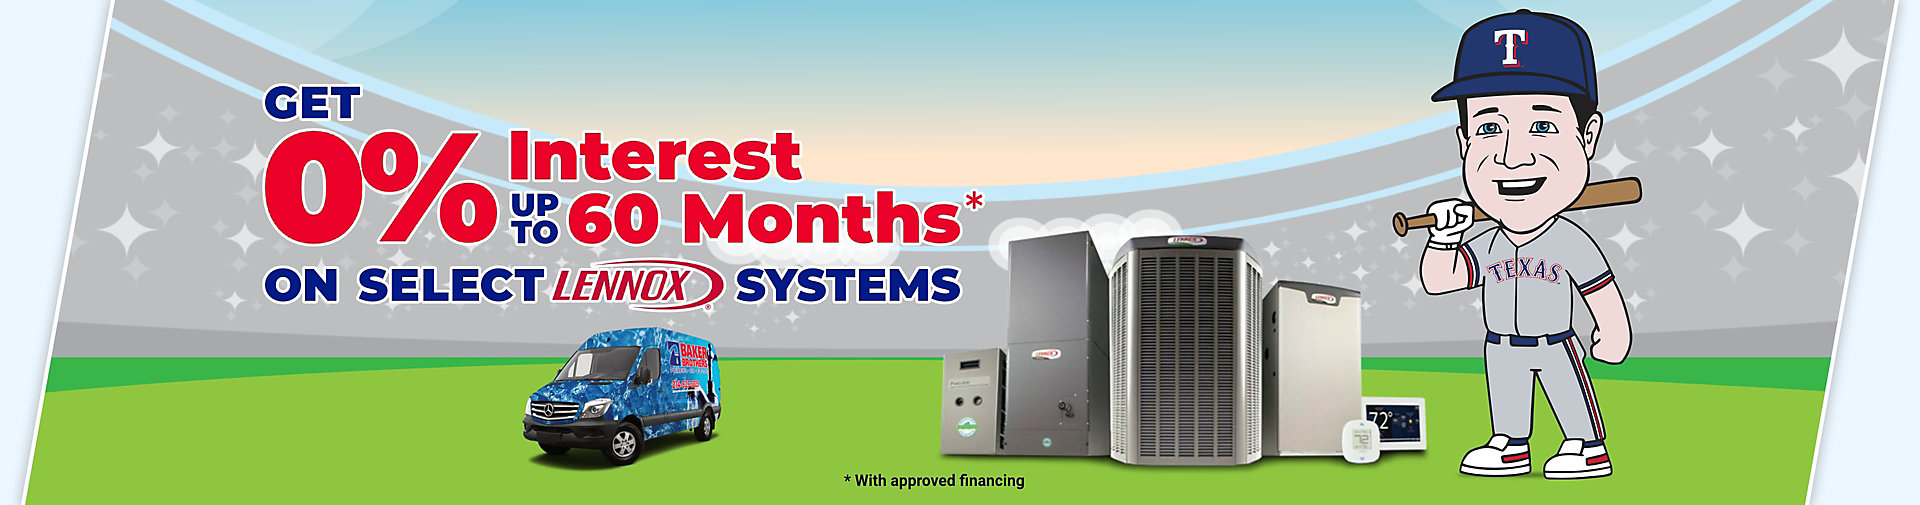 0% Interest Financing Up To 60 Months On Select Lennox Systems